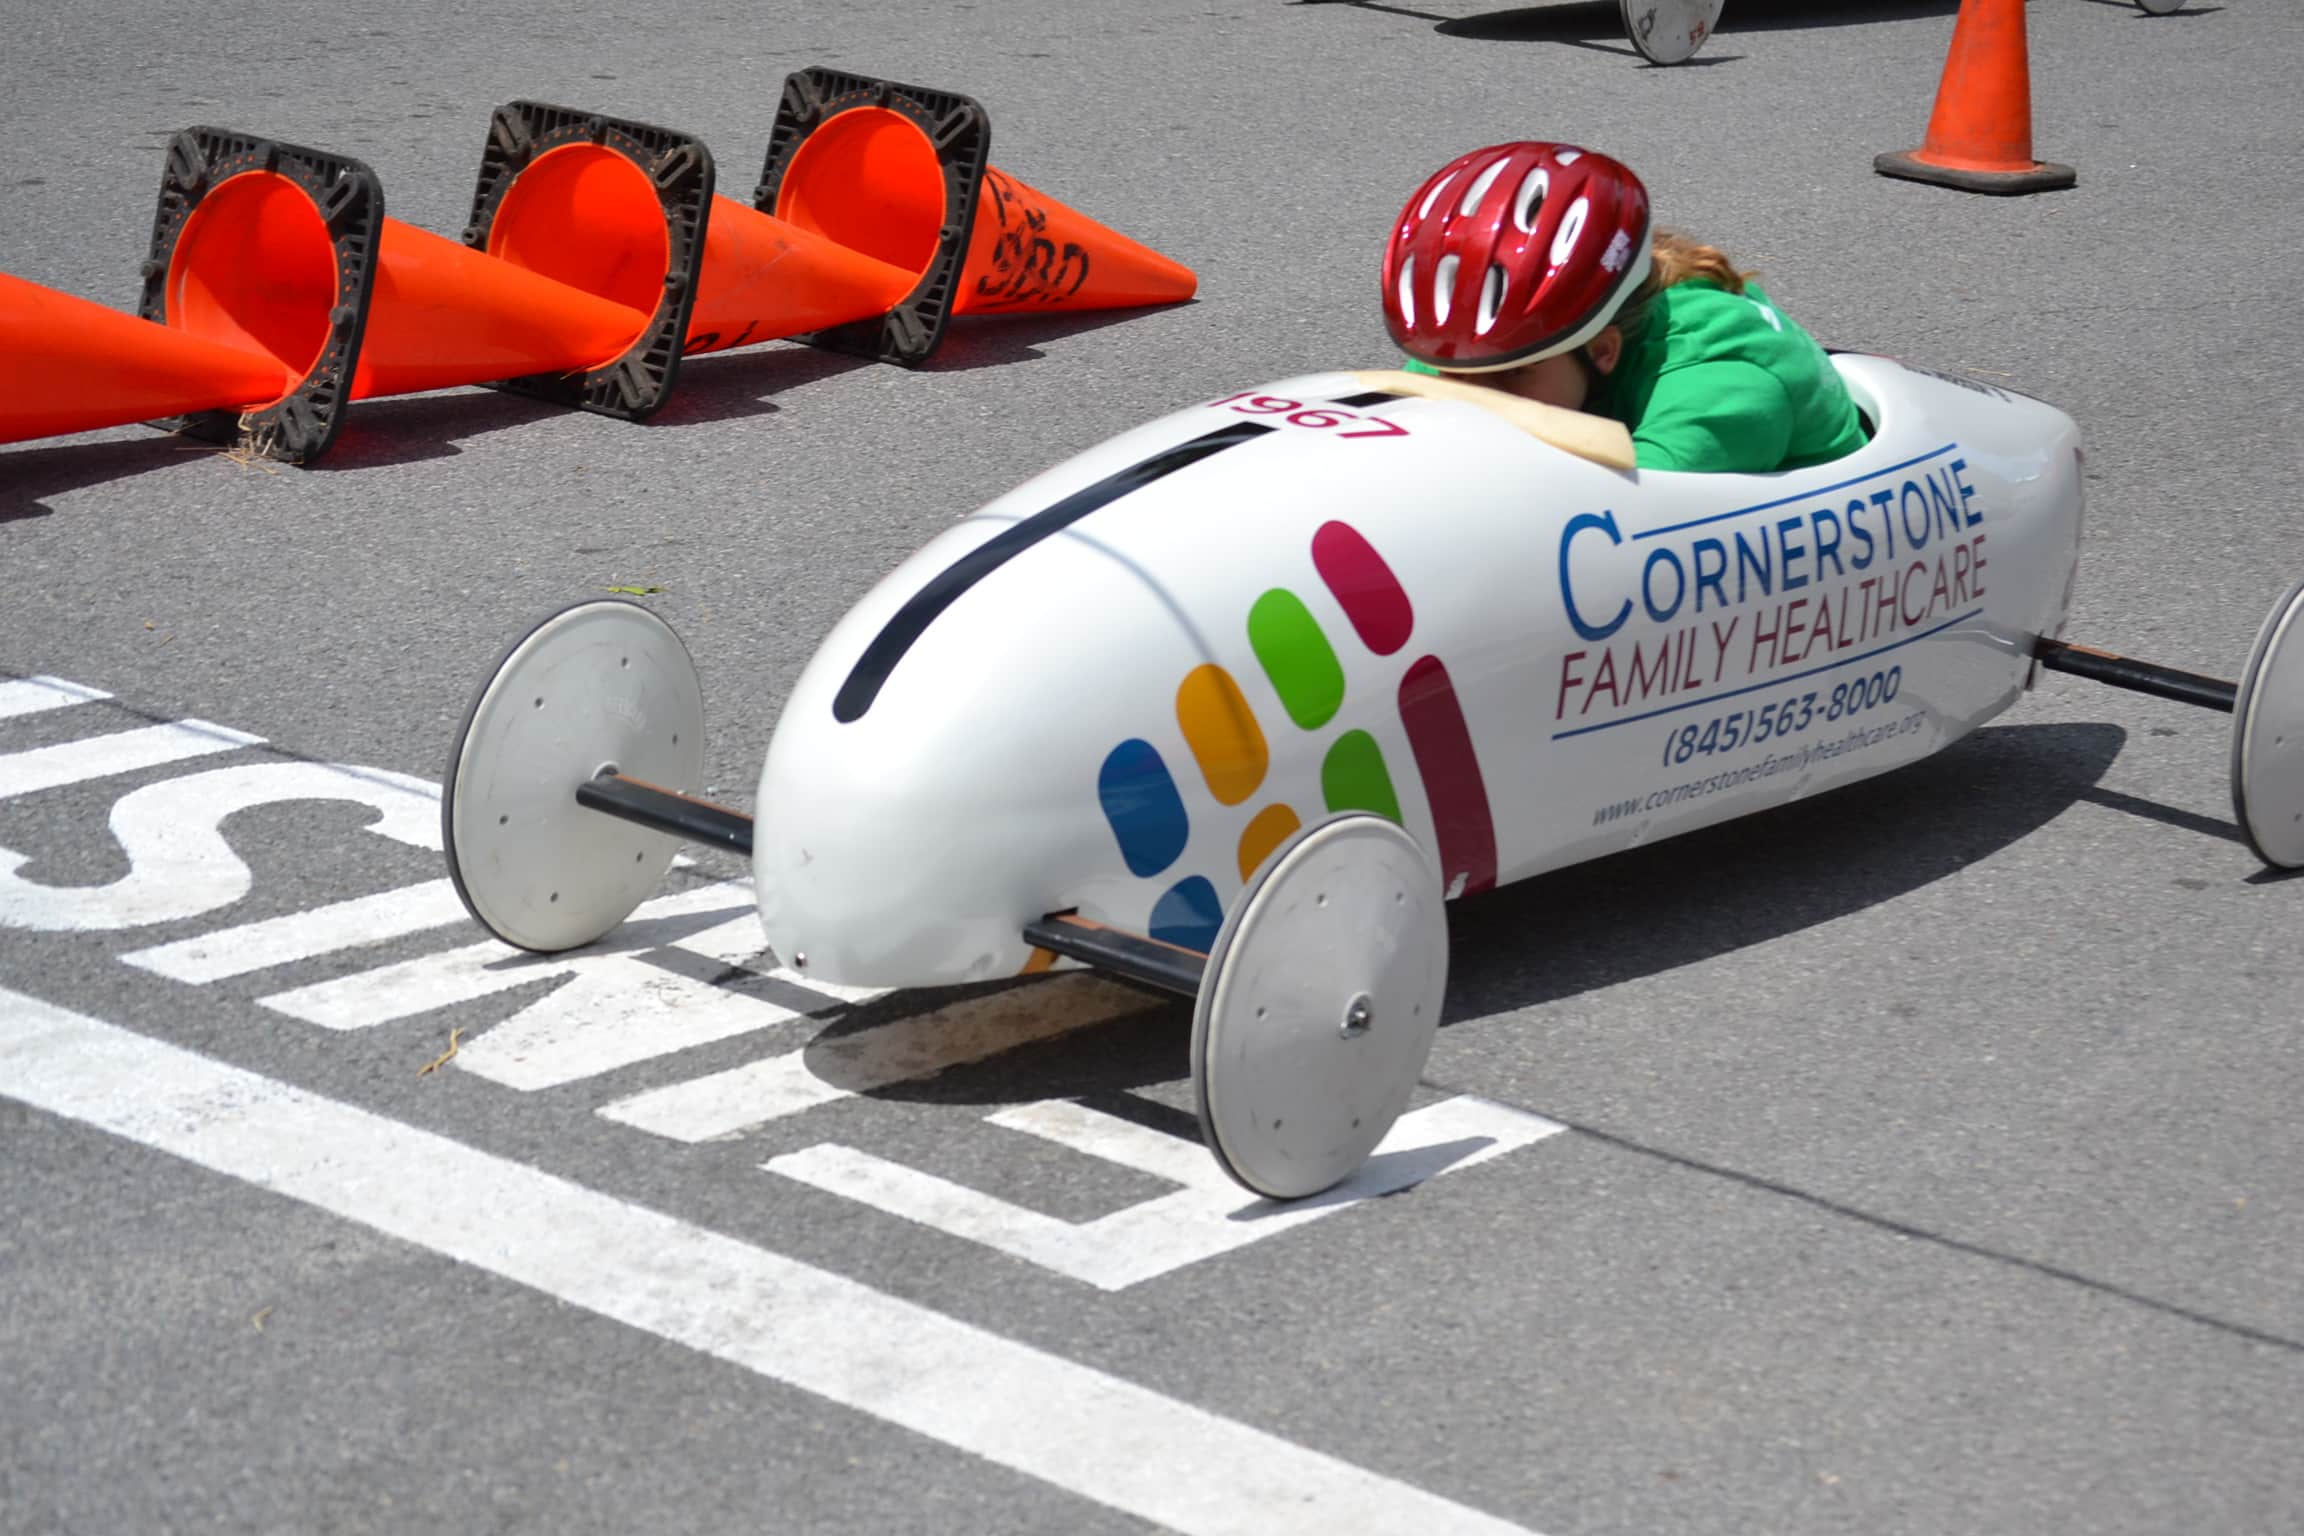 Port Jervis Soap Box Derby sponsored by Cornerstone Family Healthcare